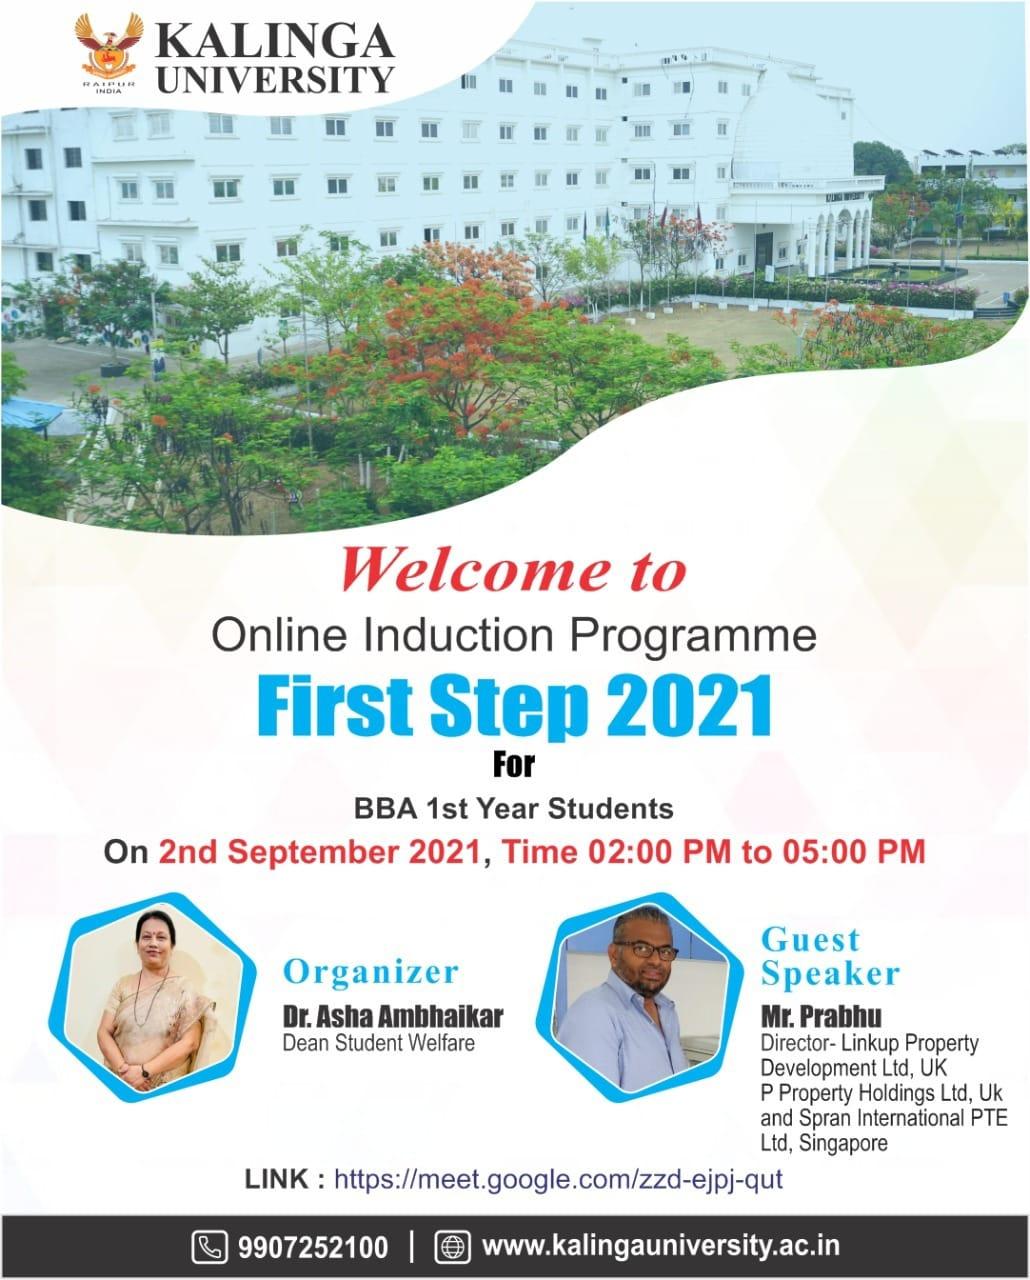 Kalinga University Organizes Online Induction Programme for the Newly Admitted Students for BBA Programme ‘First- Step 2021’